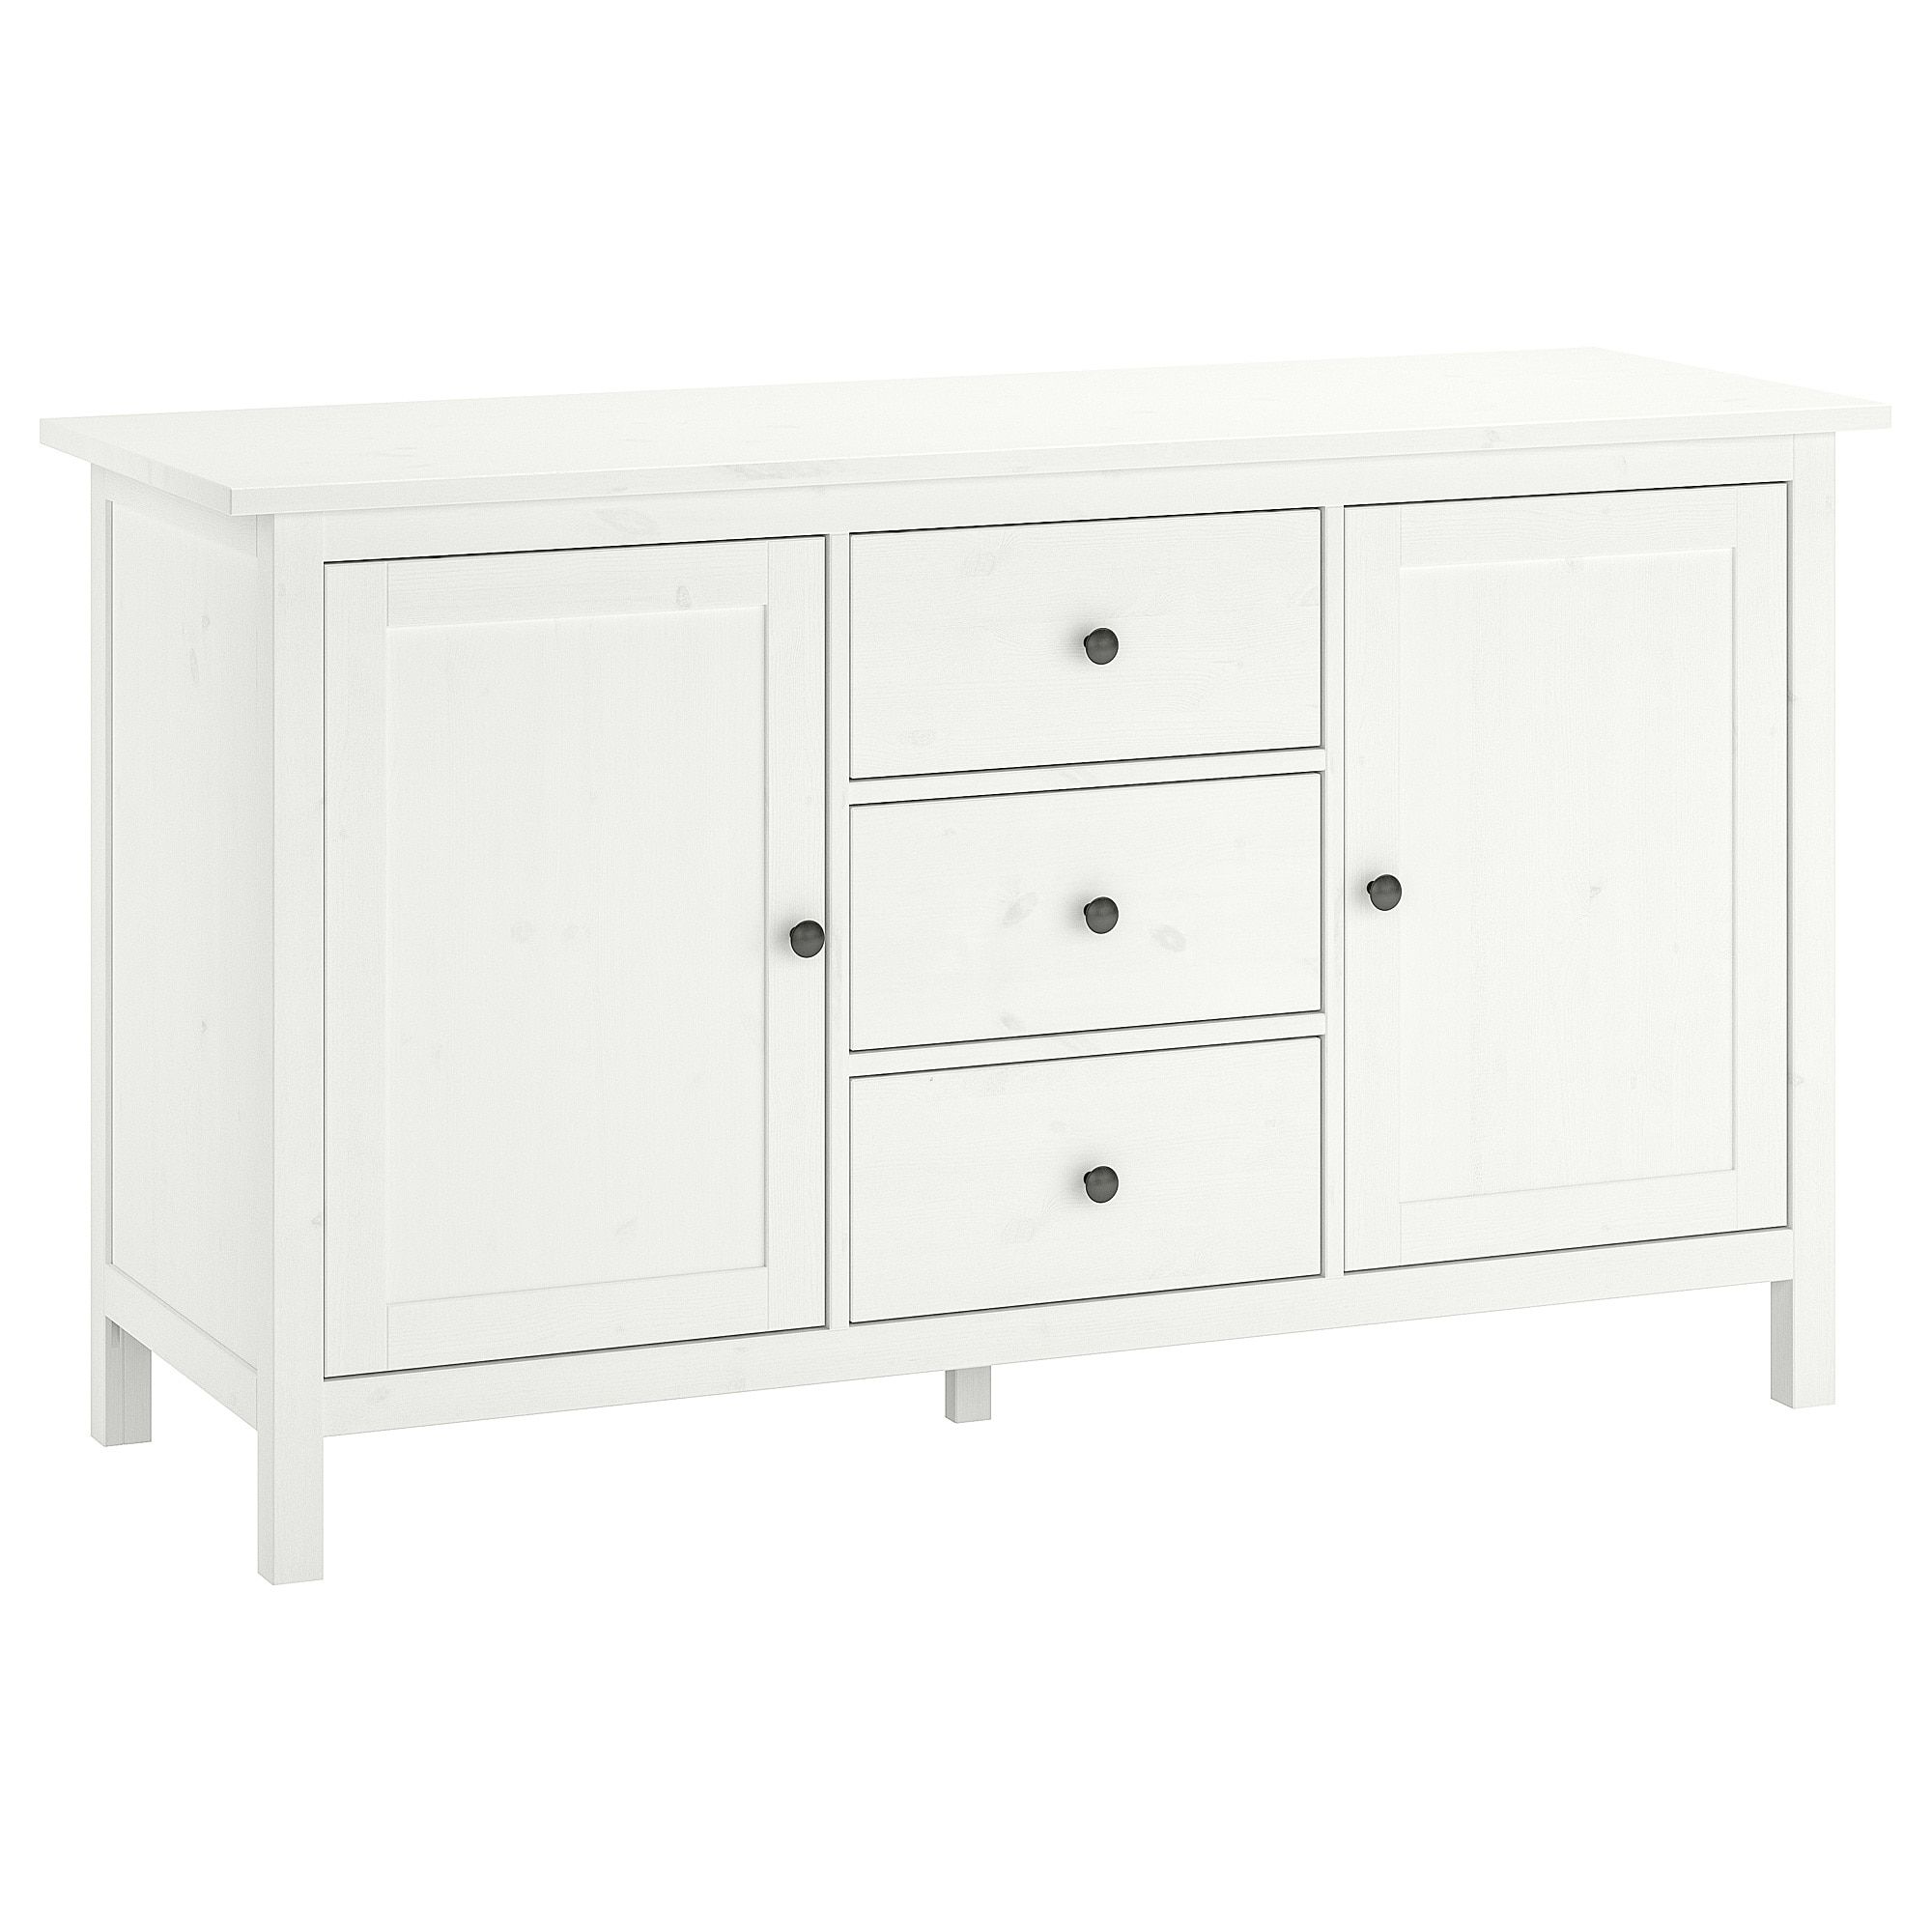 Hemnes Sideboard, White Stain Intended For North York Sideboards (Gallery 10 of 20)